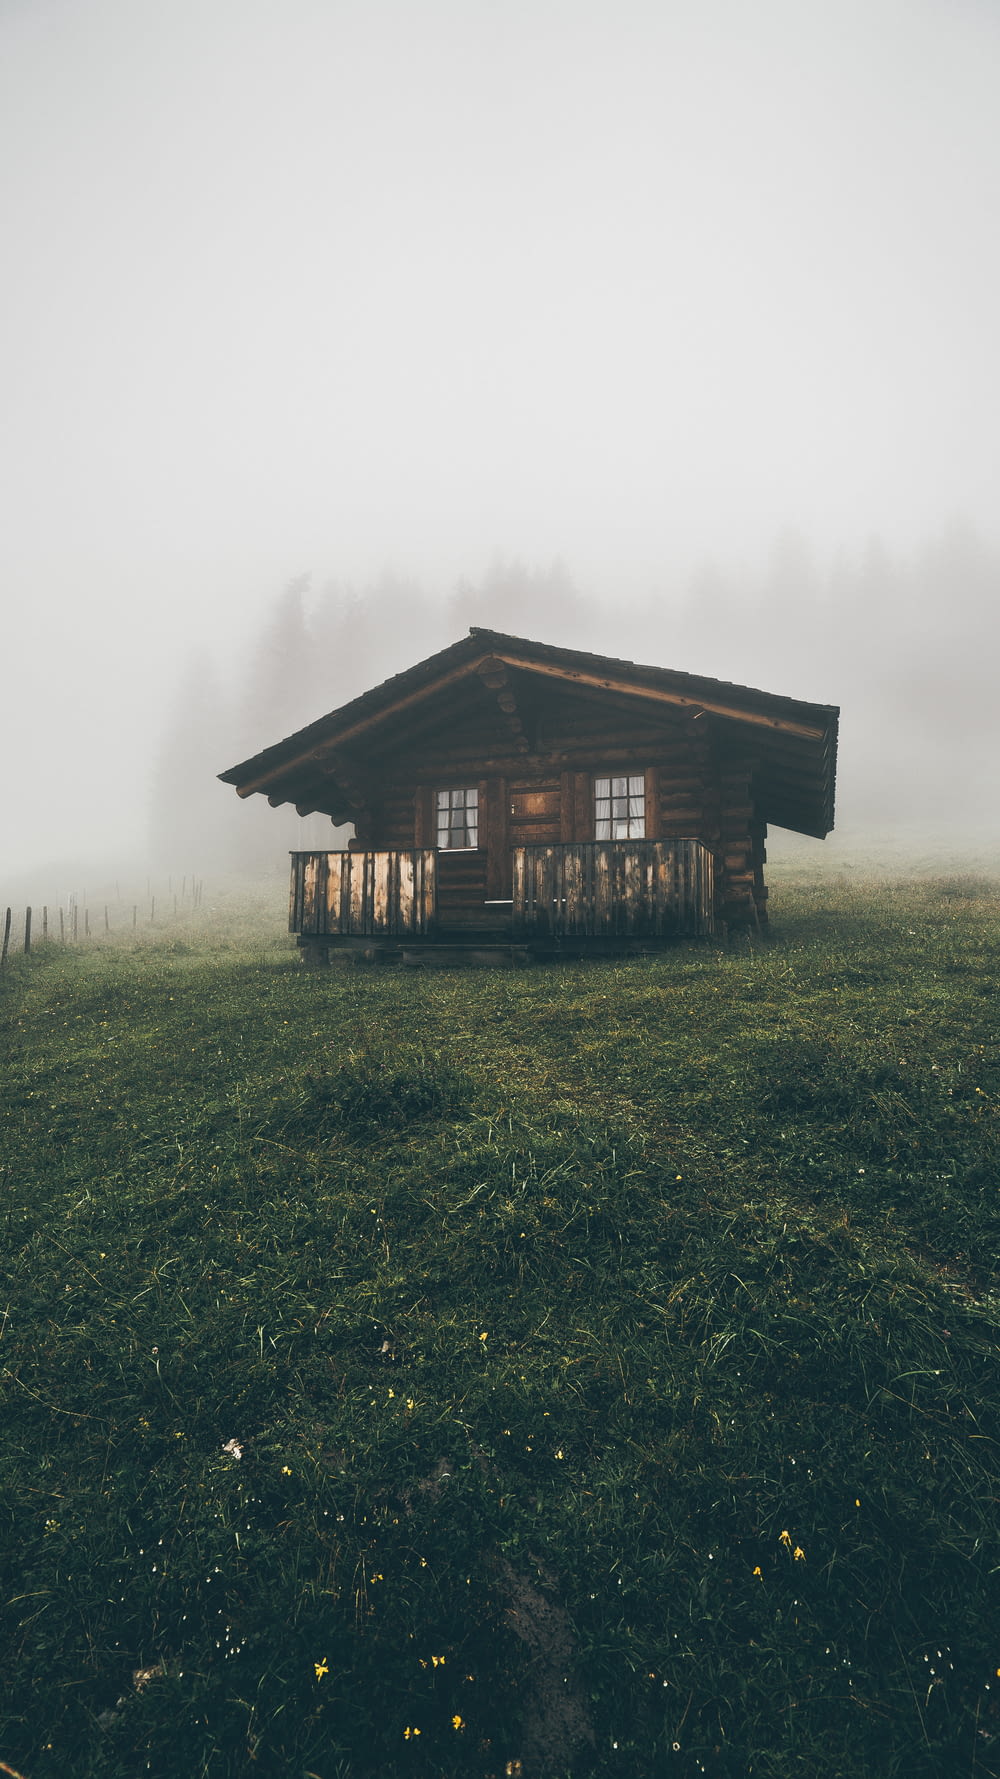 brown wooden house in a field with fog during daytime